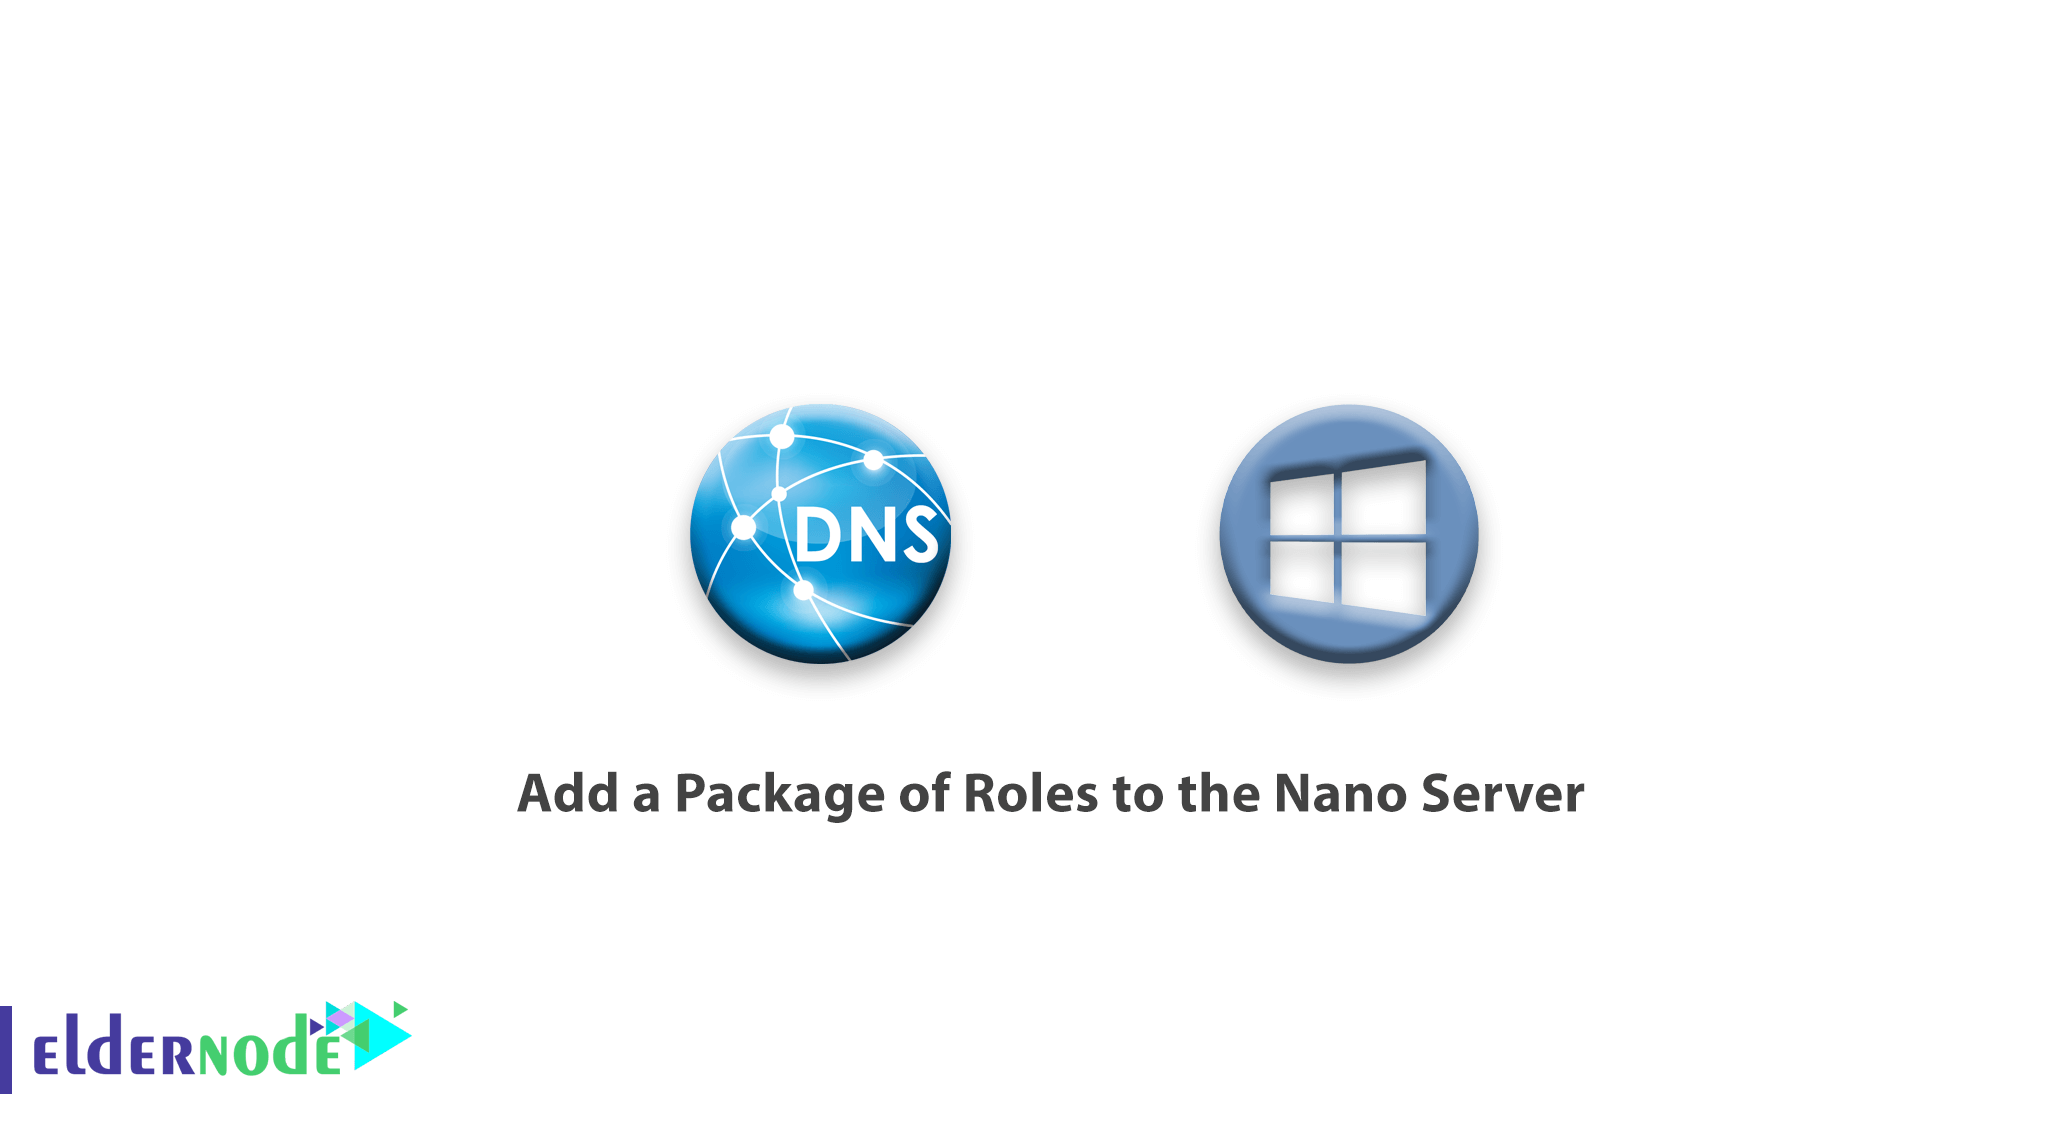 How to add a package of roles to the nano server